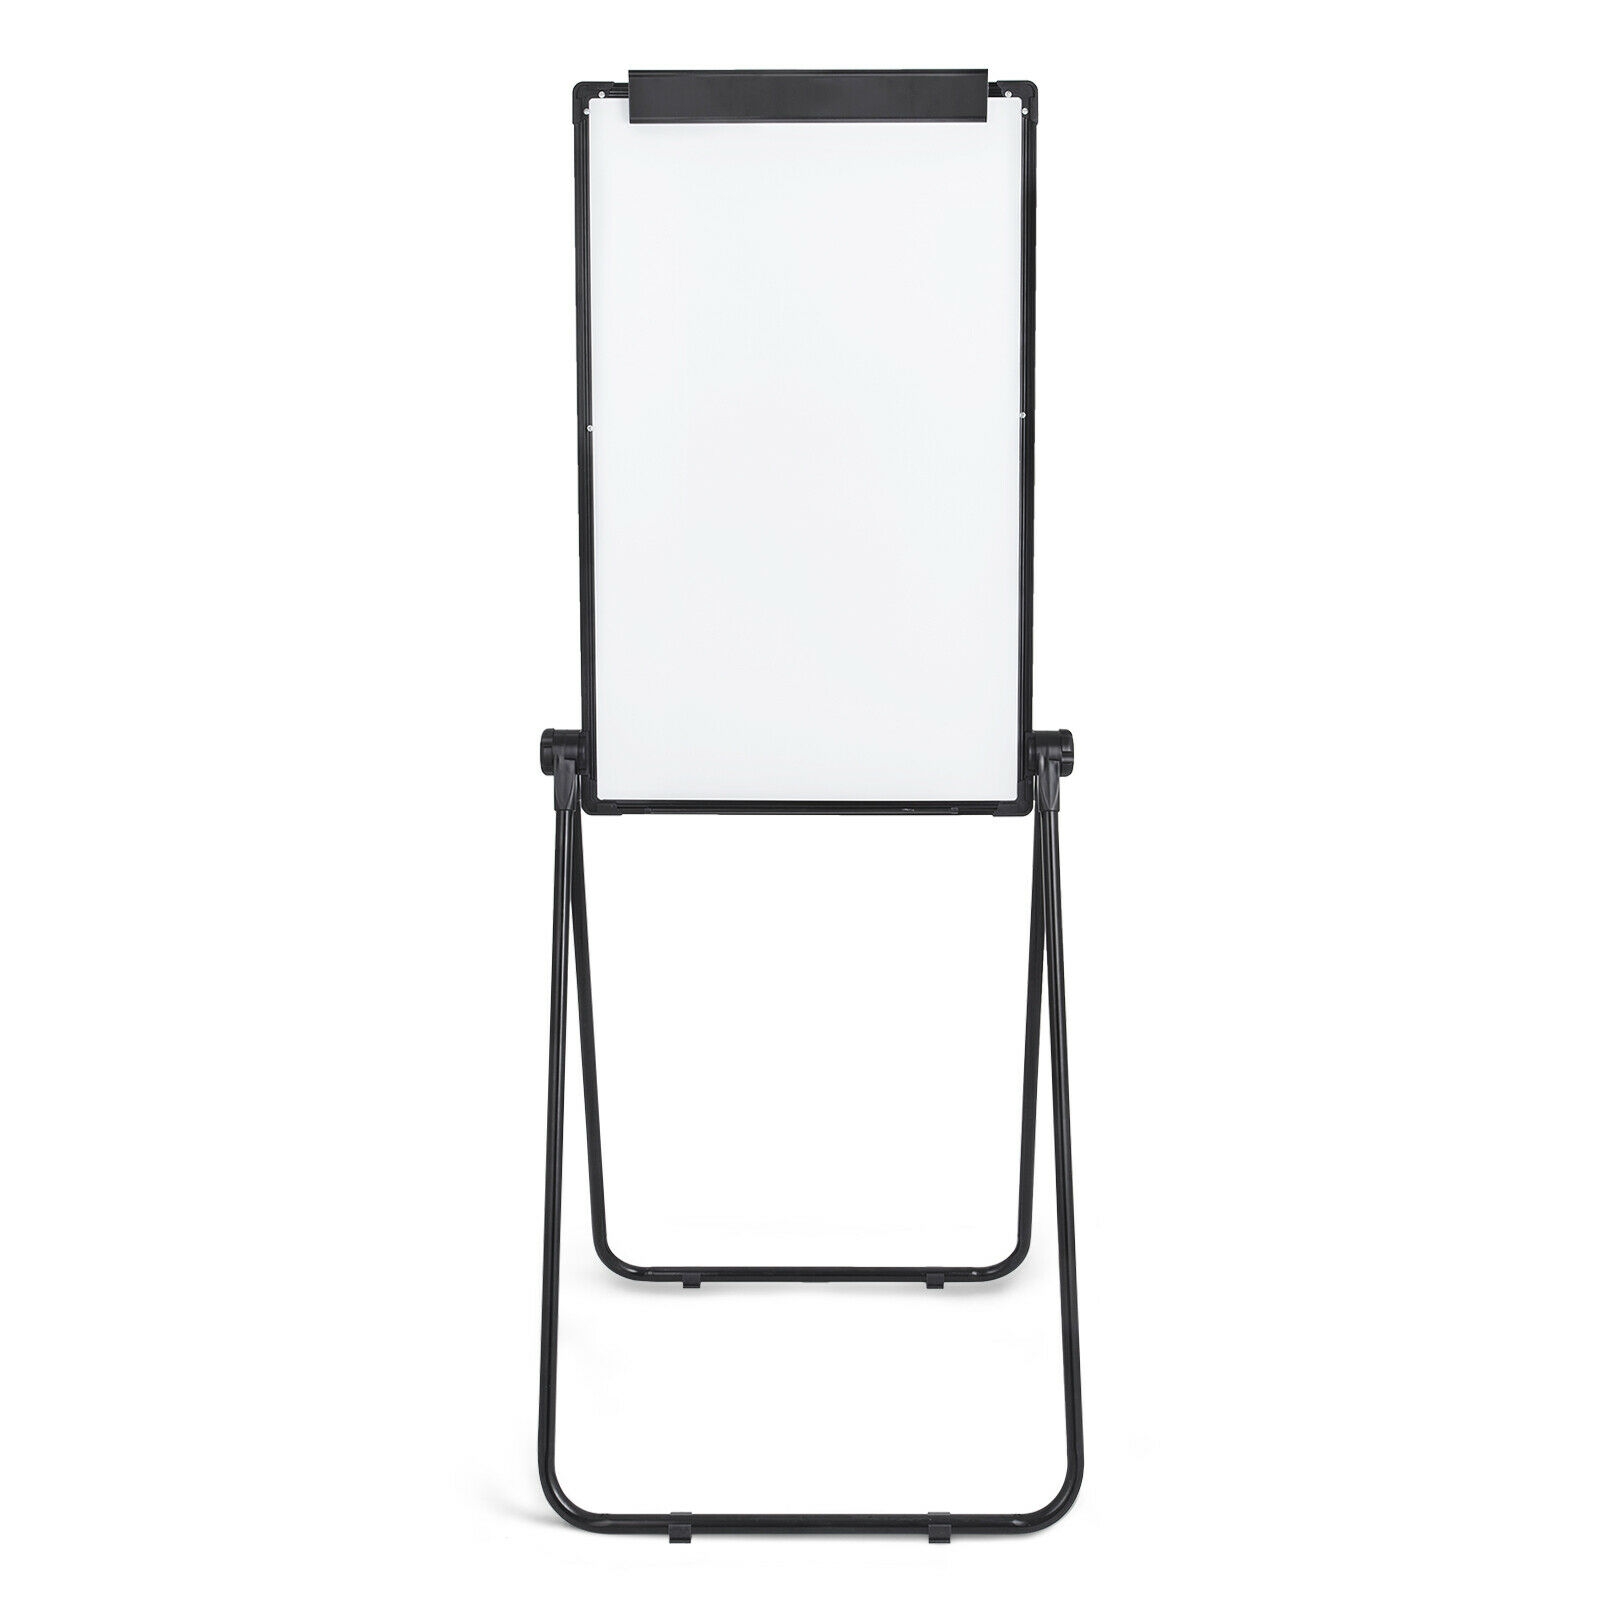 Magnetic whiteboard,tempered glass,dry-erase